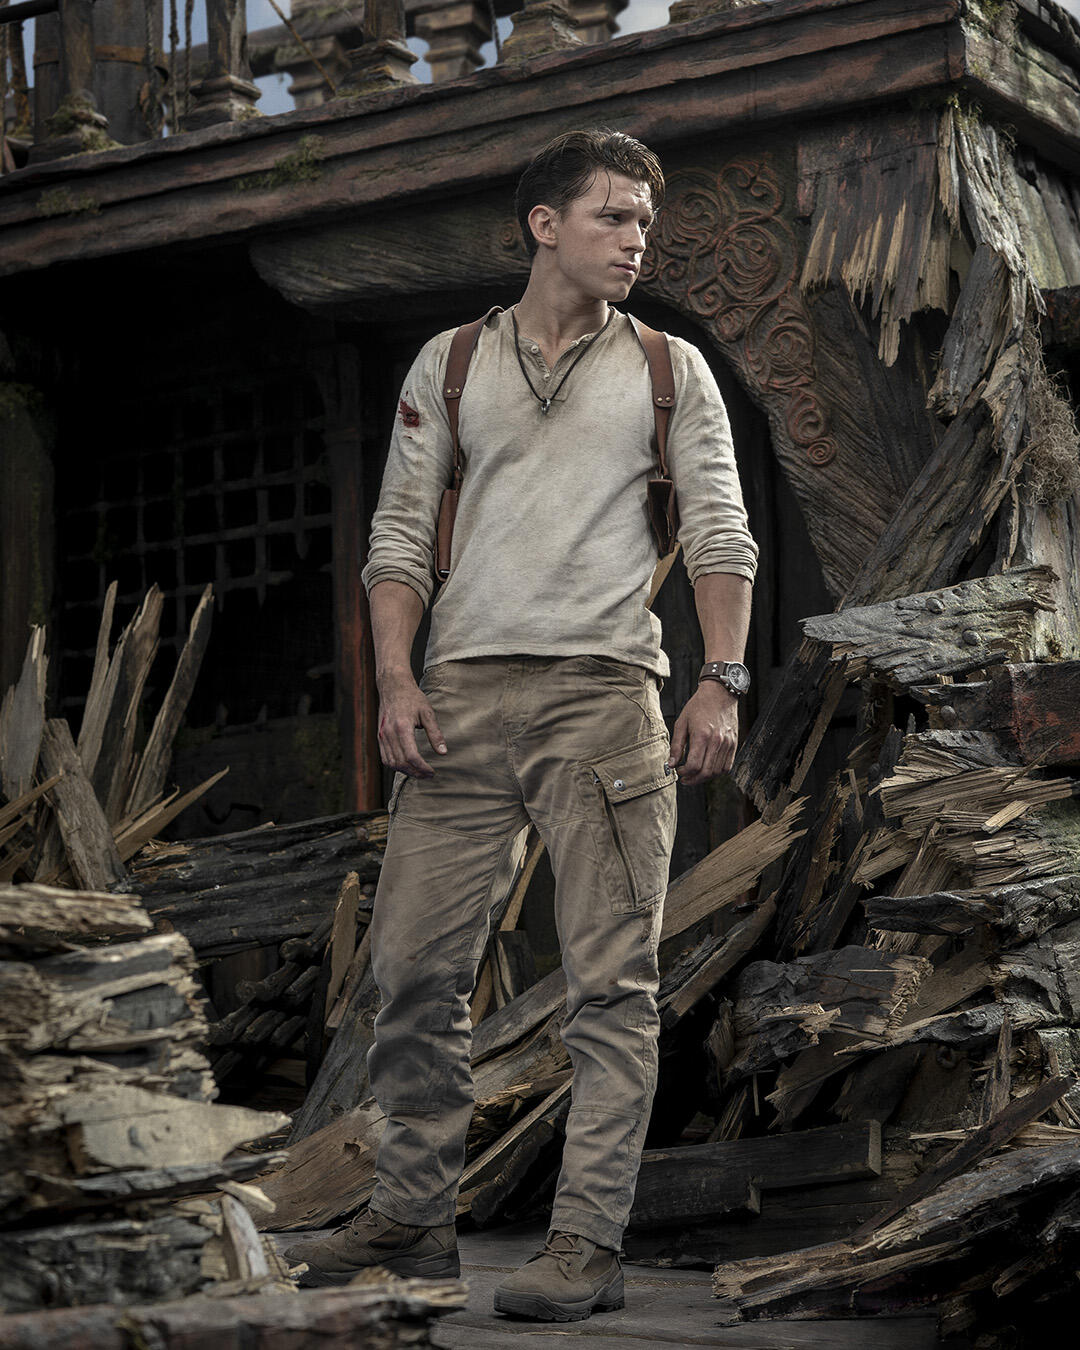 How Old Is Nathan Drake In The Uncharted Movie vs. The Games?